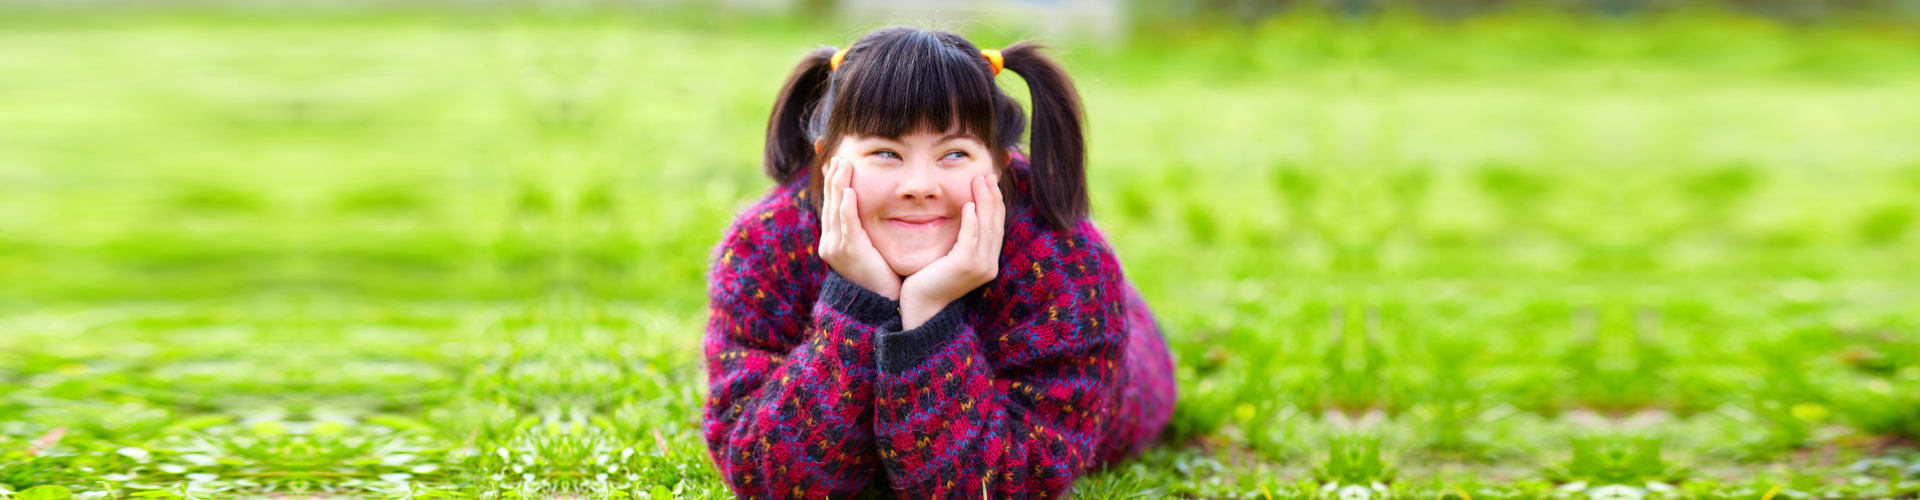 happy young girl with disability on spring lawn